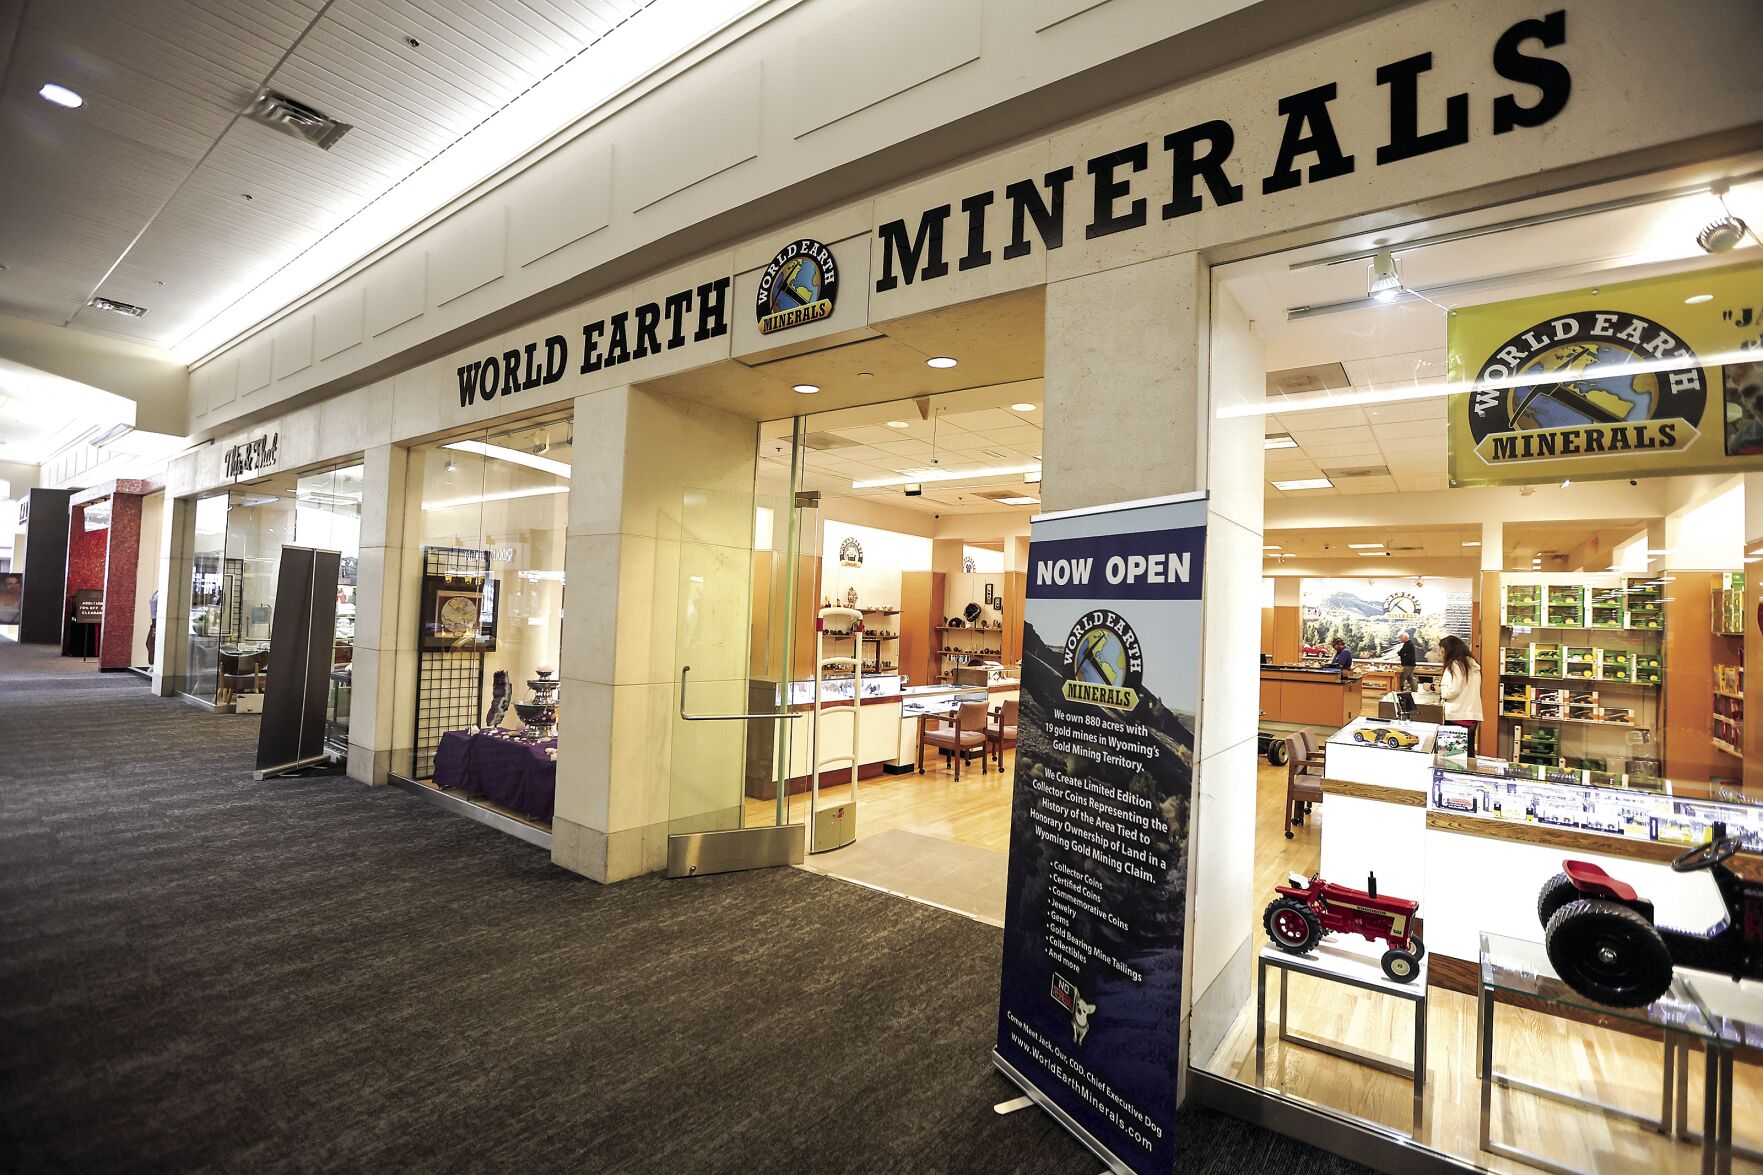 World Earth Minerals is now open at Kennedy Mall in Dubuque.    PHOTO CREDIT: Dave Kettering